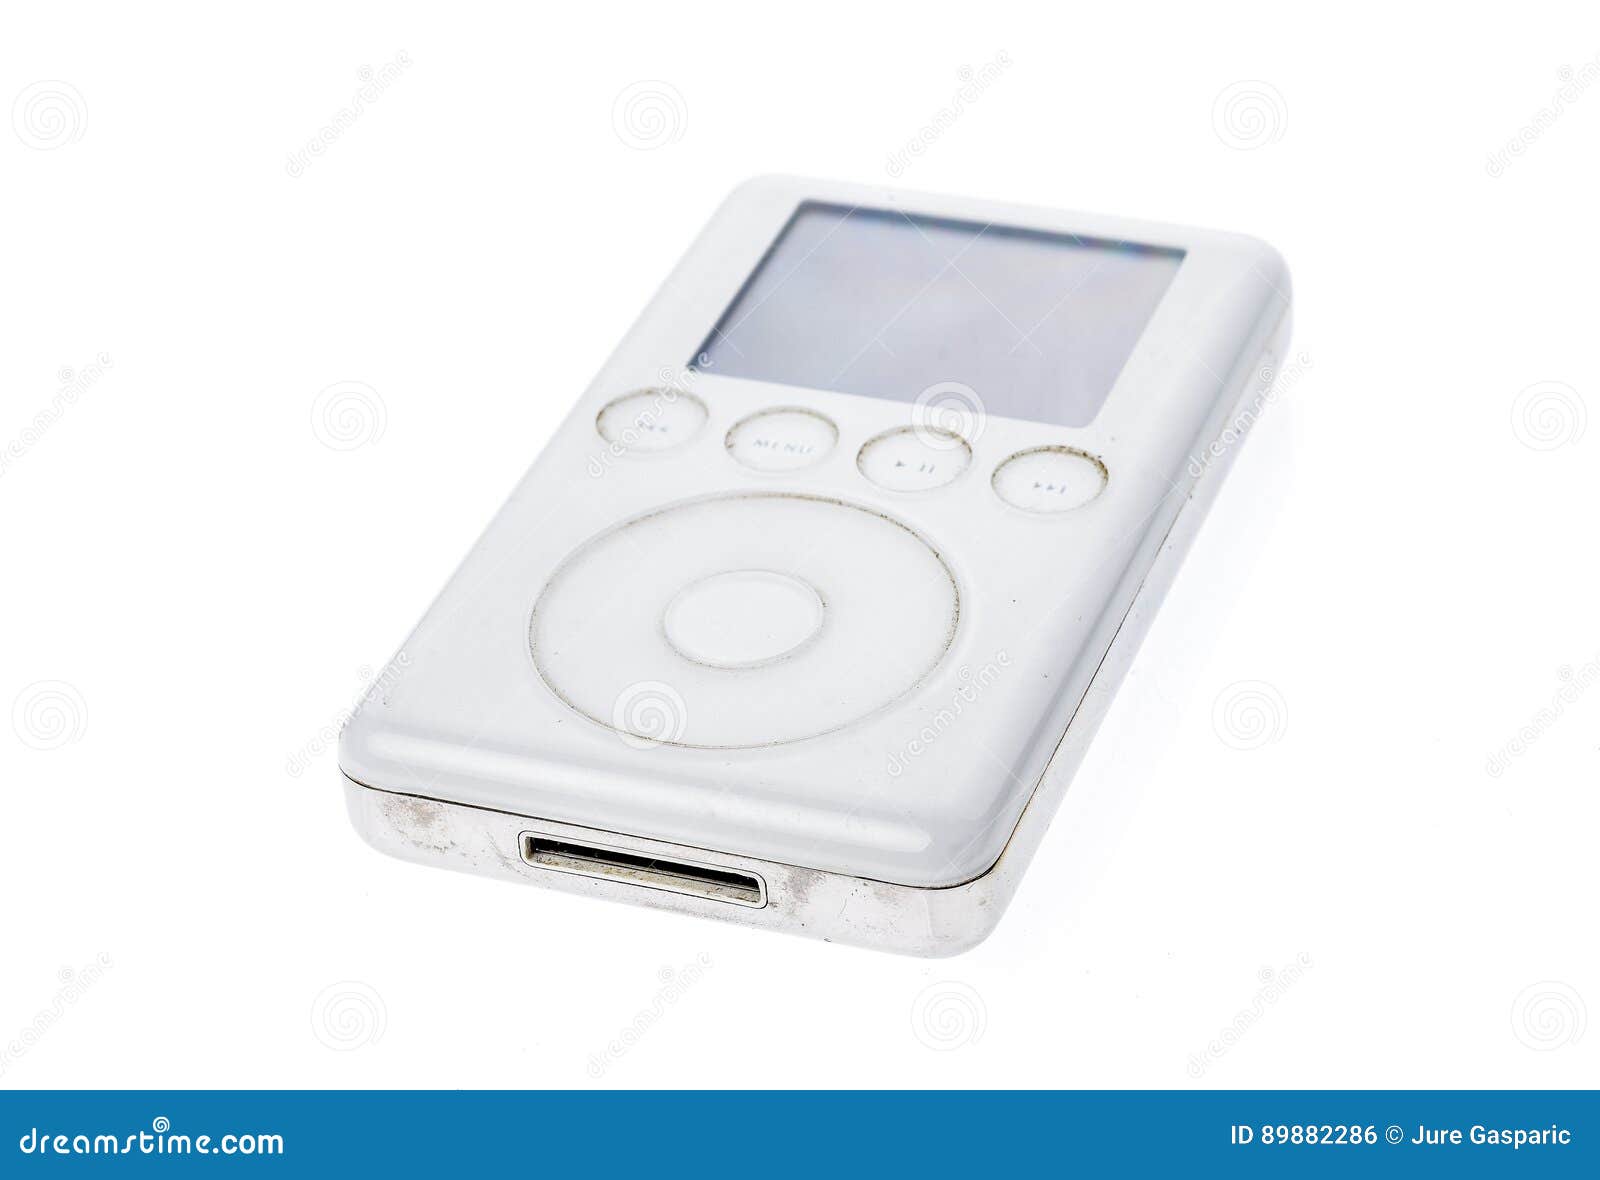 old apple ipod classic 3rd generation 15gb 2003 mp3 player.